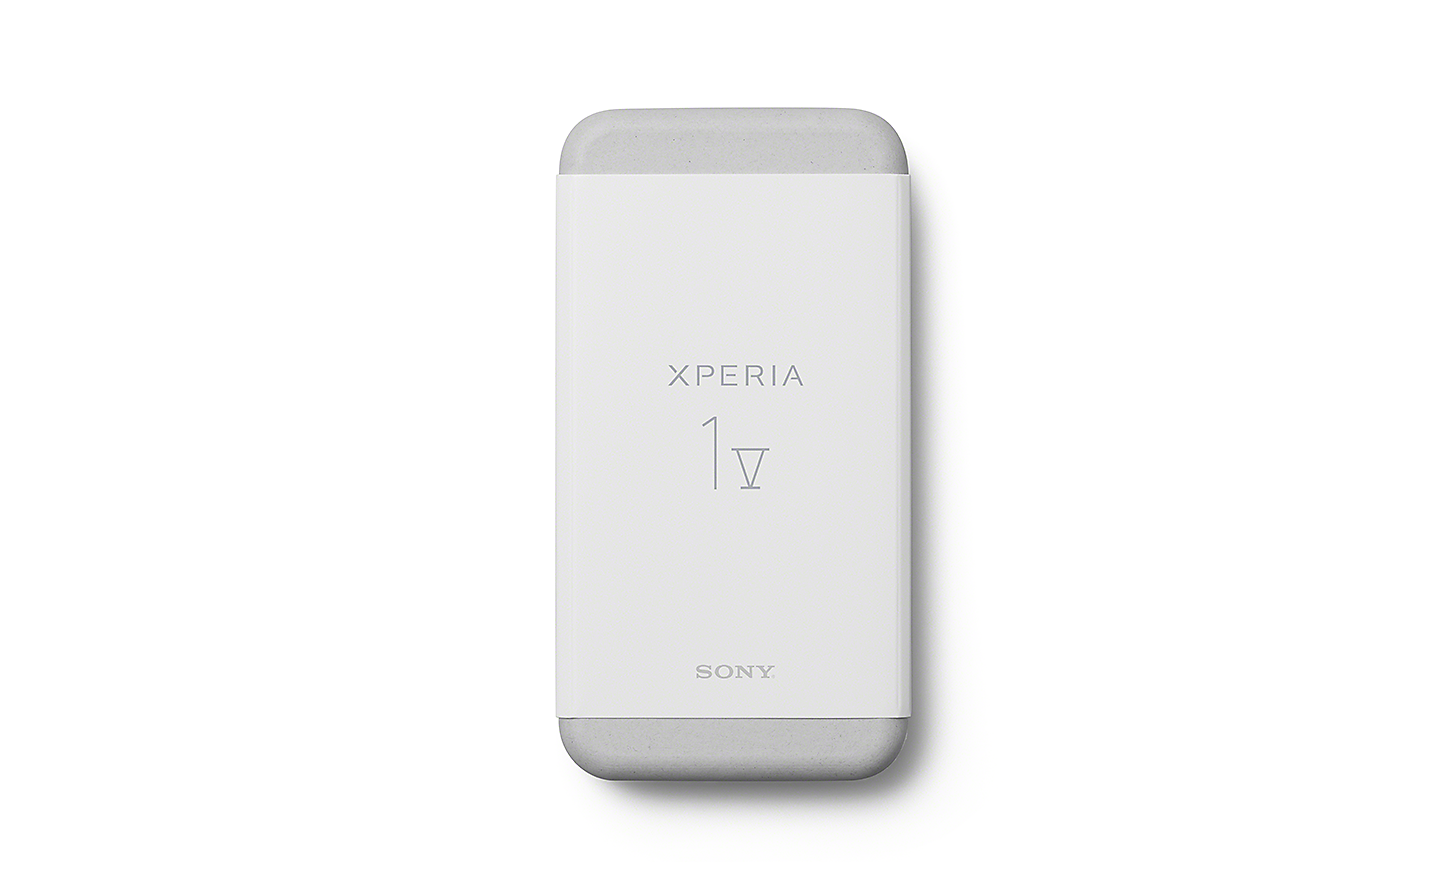 Packaging for the Xperia 1 V